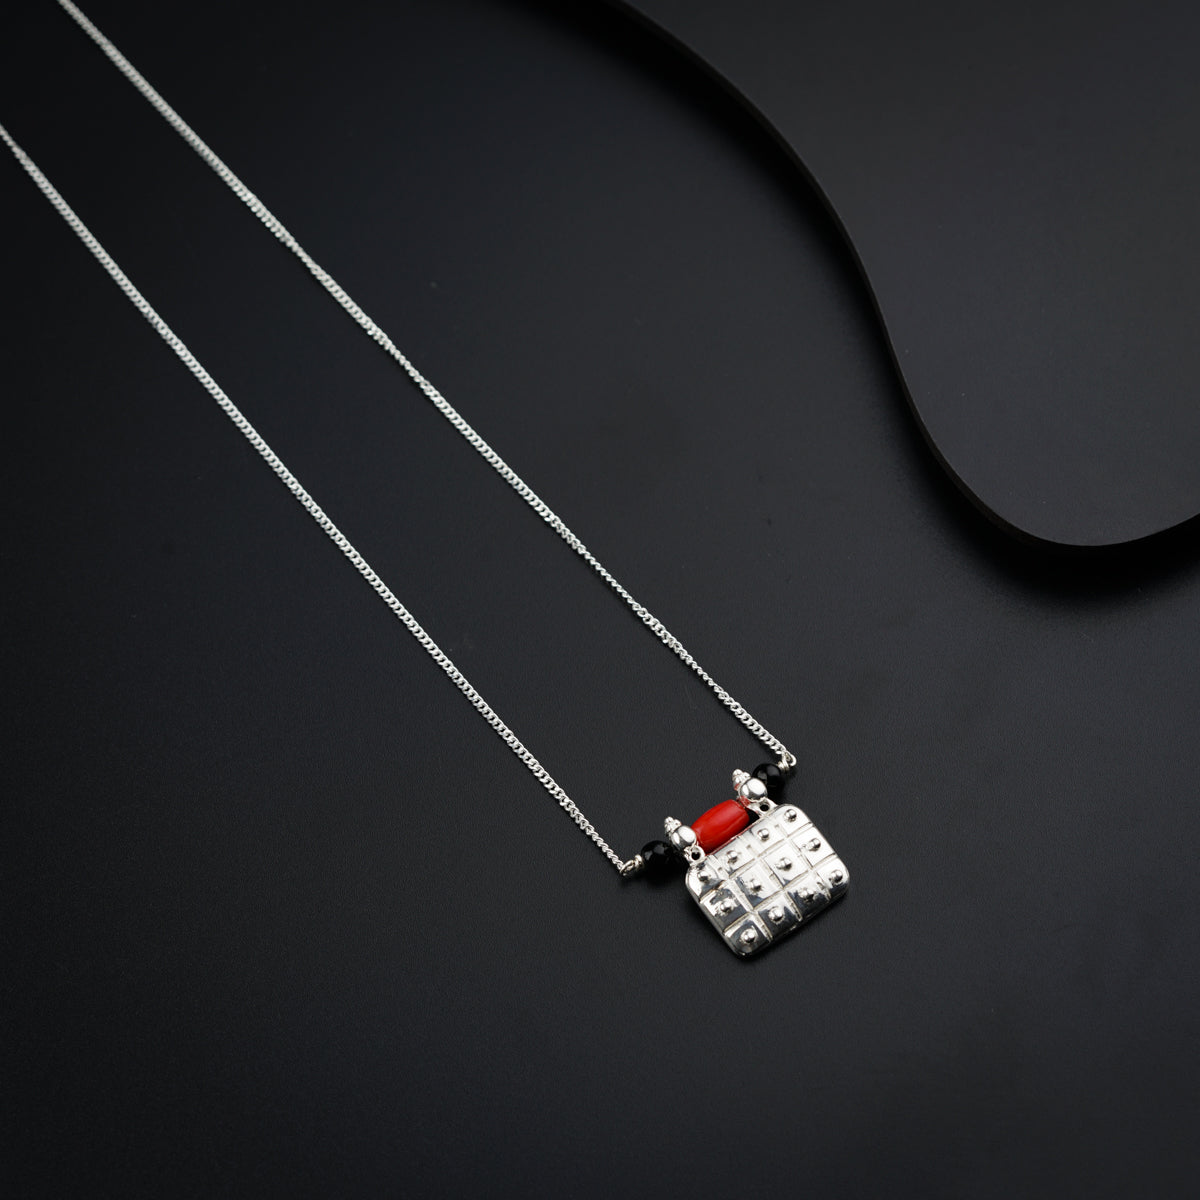 a red and white lego necklace on a black surface